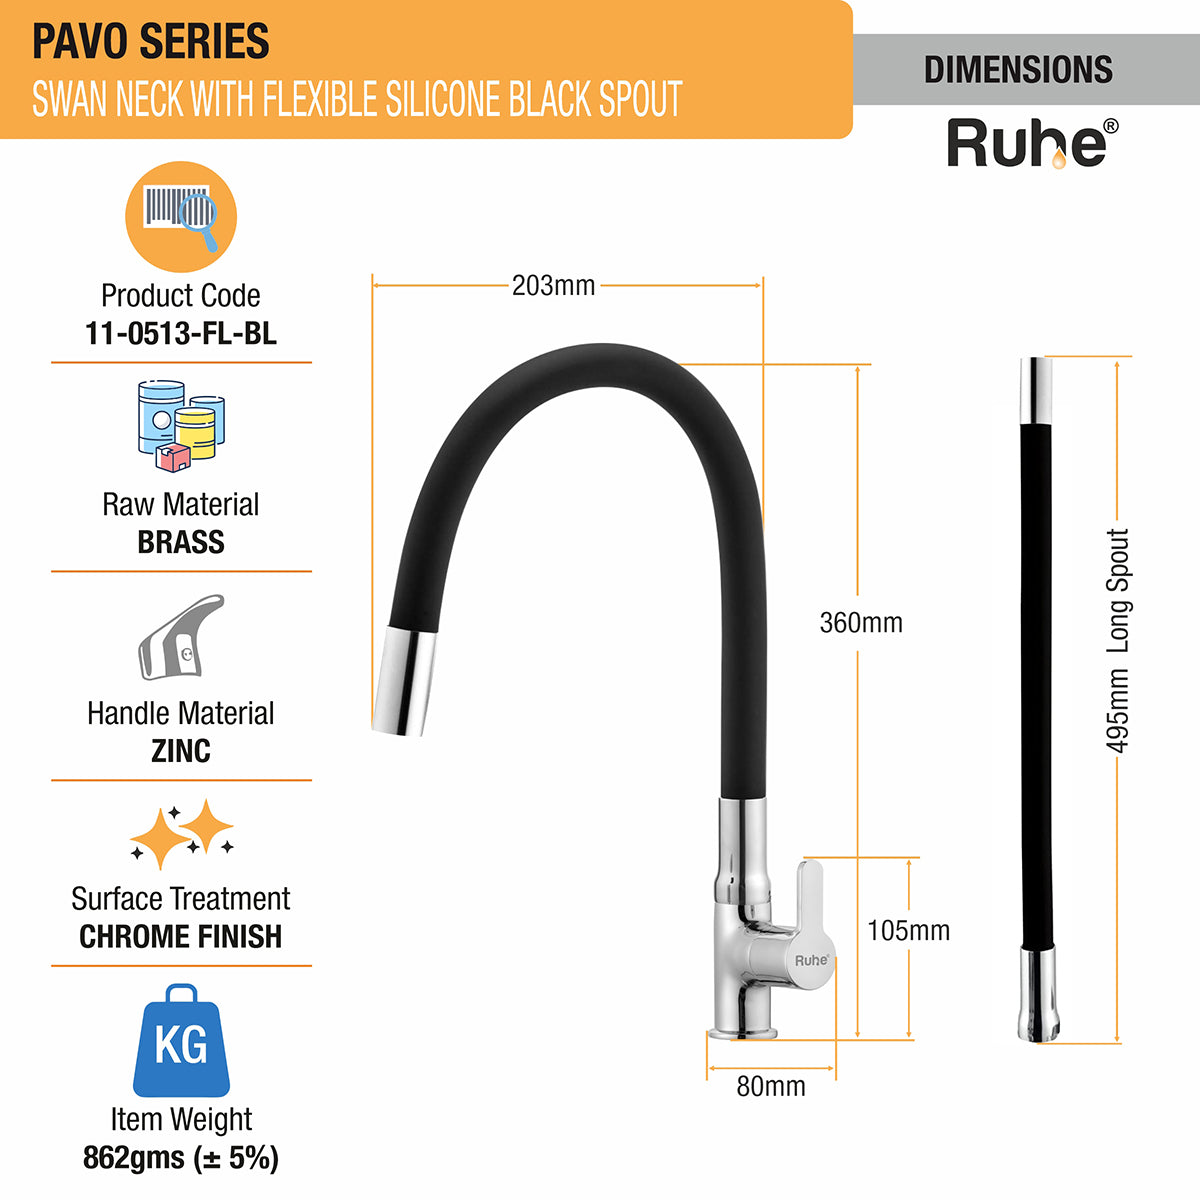 Pavo Swan Neck Brass Faucet with Silicone Black Flexible Spout dimensions and sizes